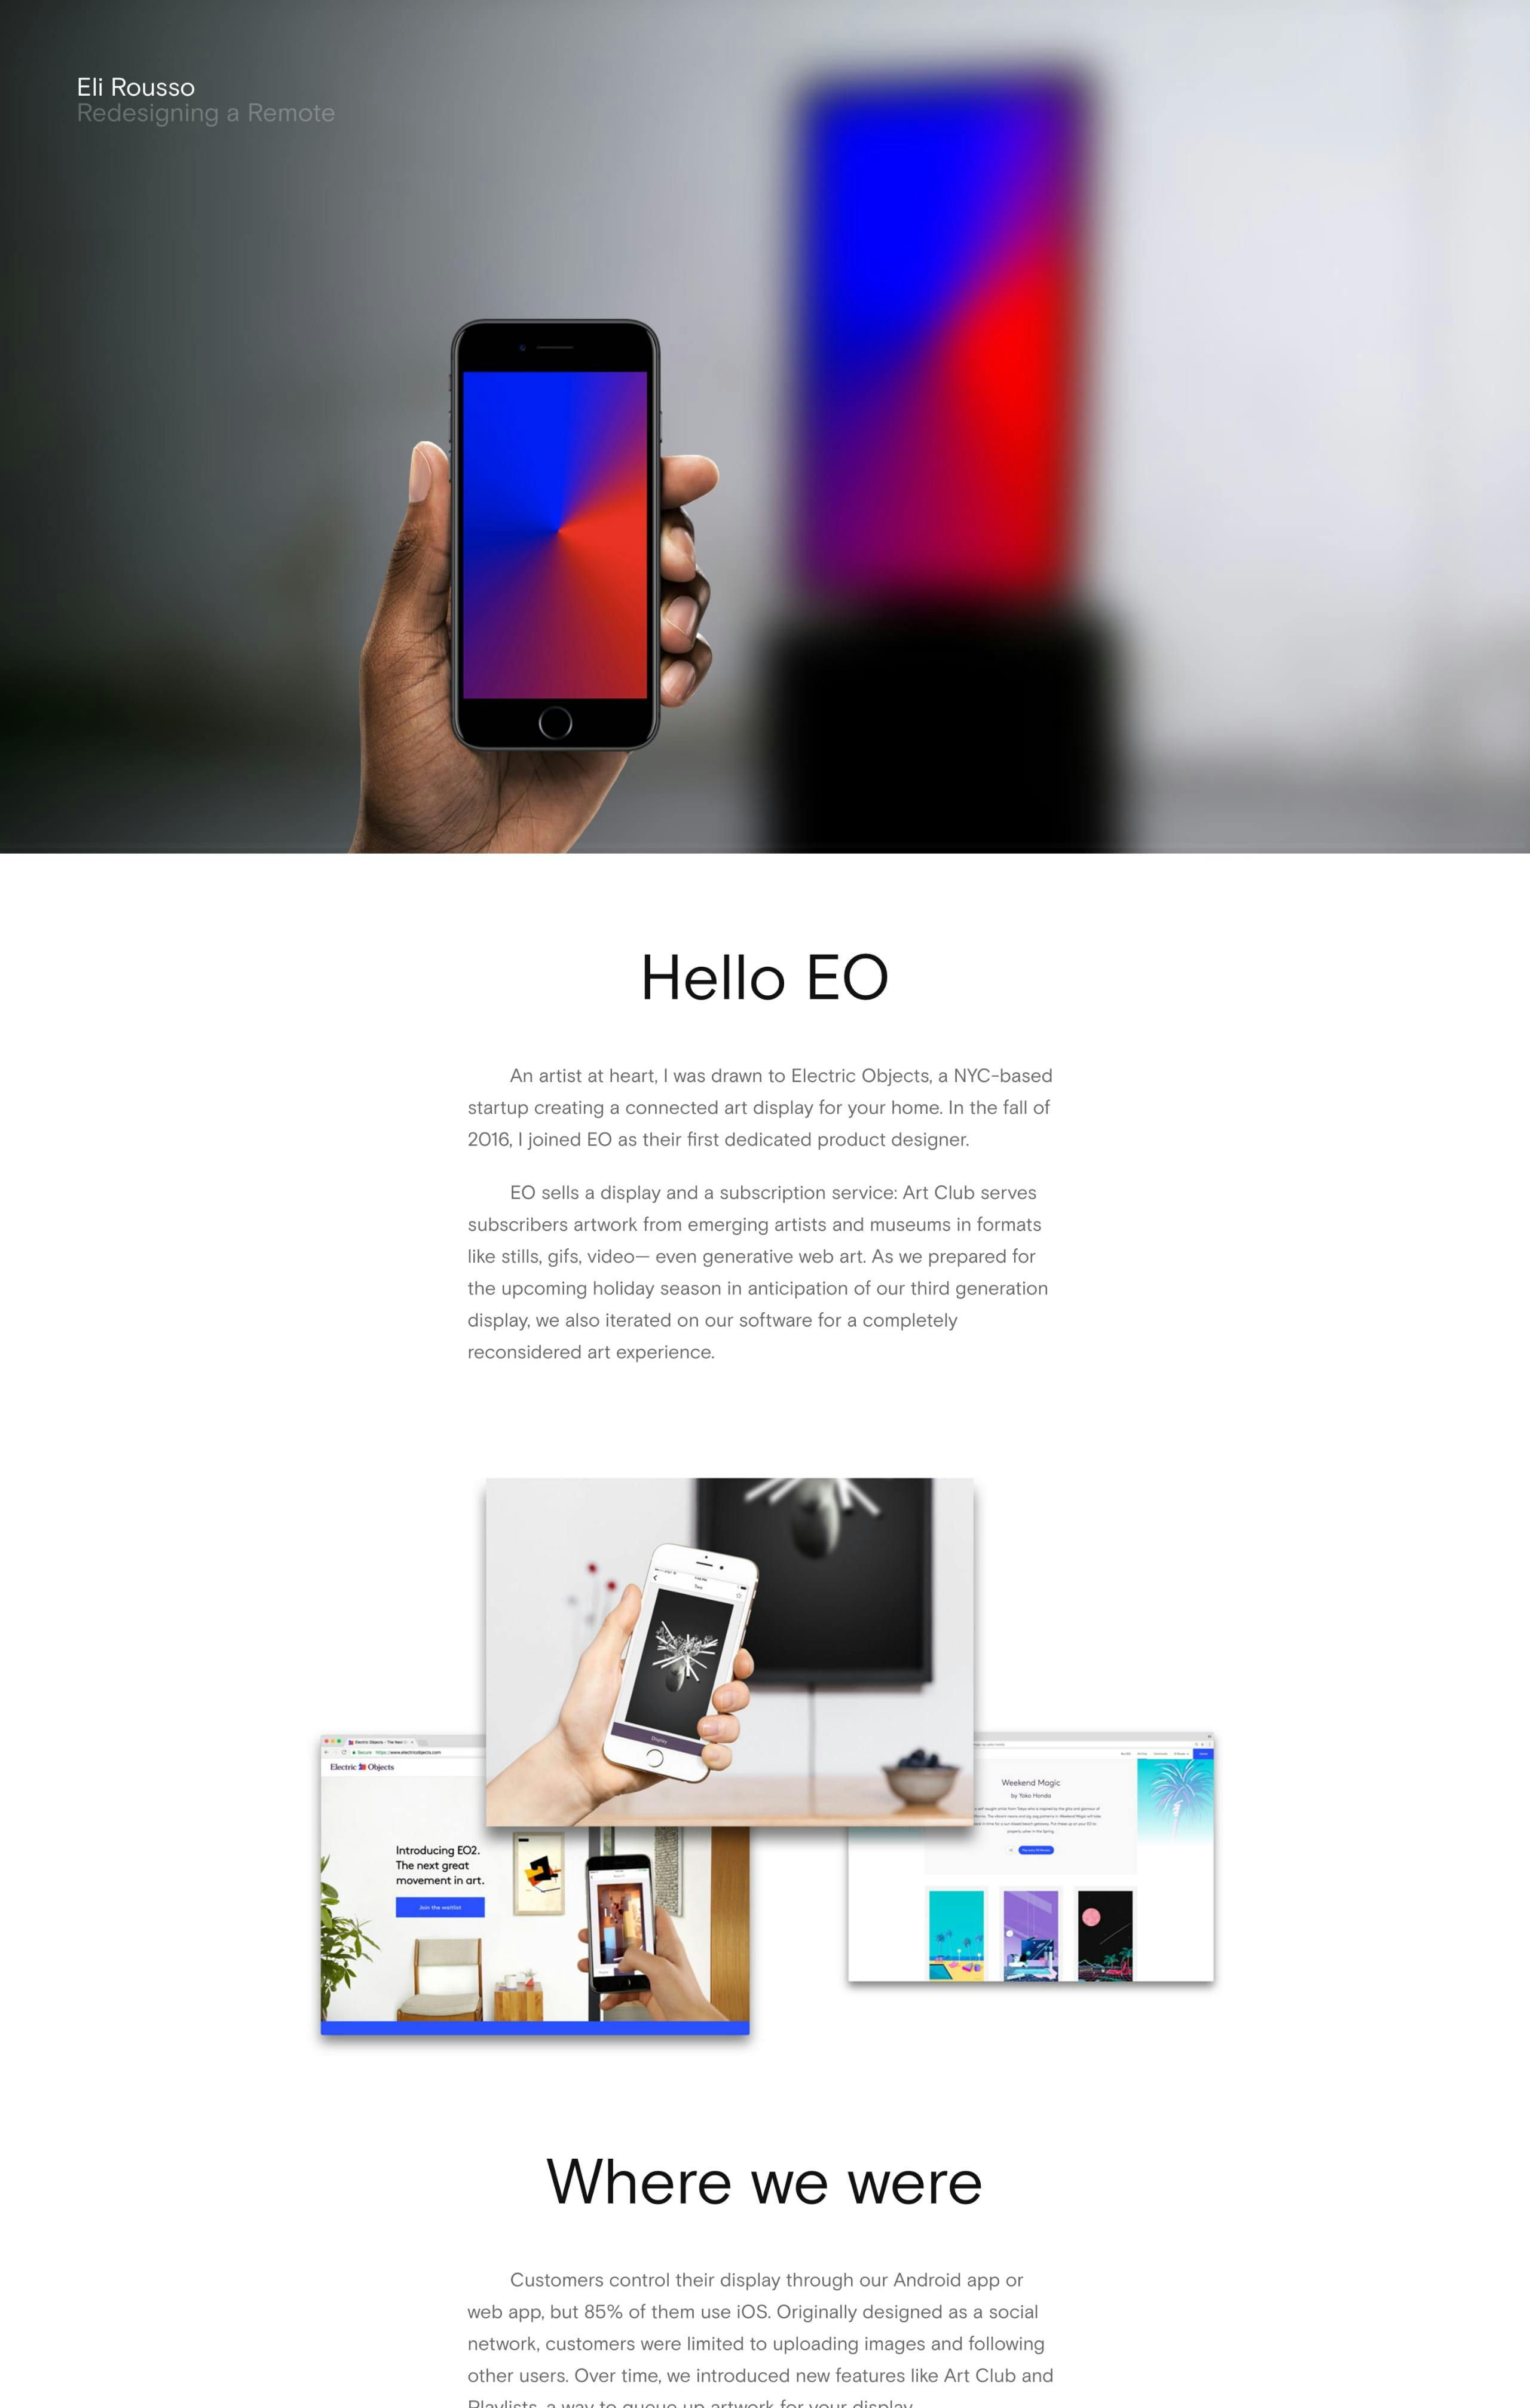 Redesigning a Remote by Eli Rousso Website Screenshot